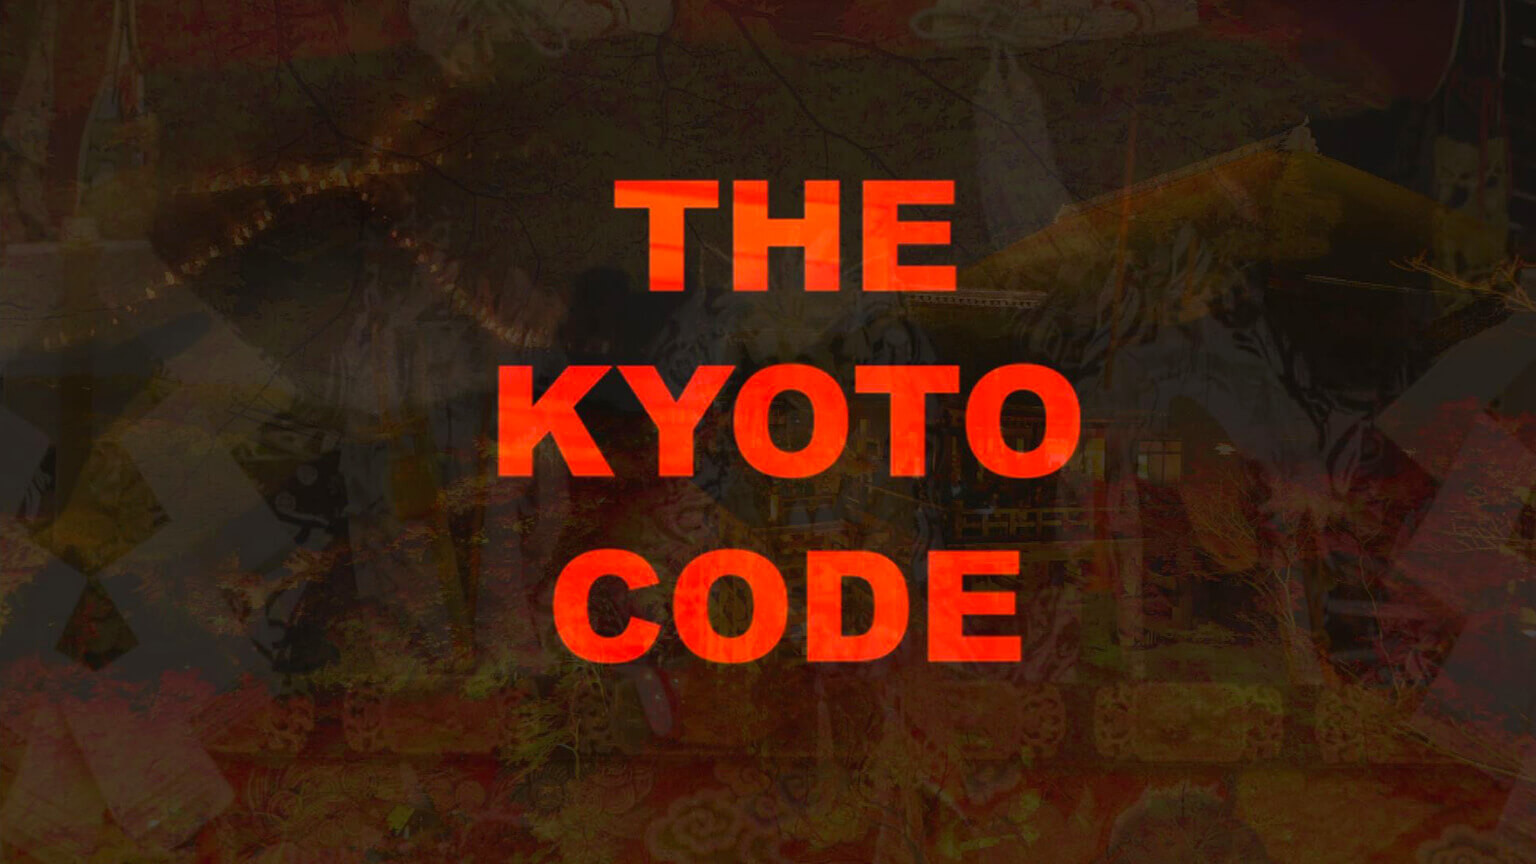 THE KYOTO CODE